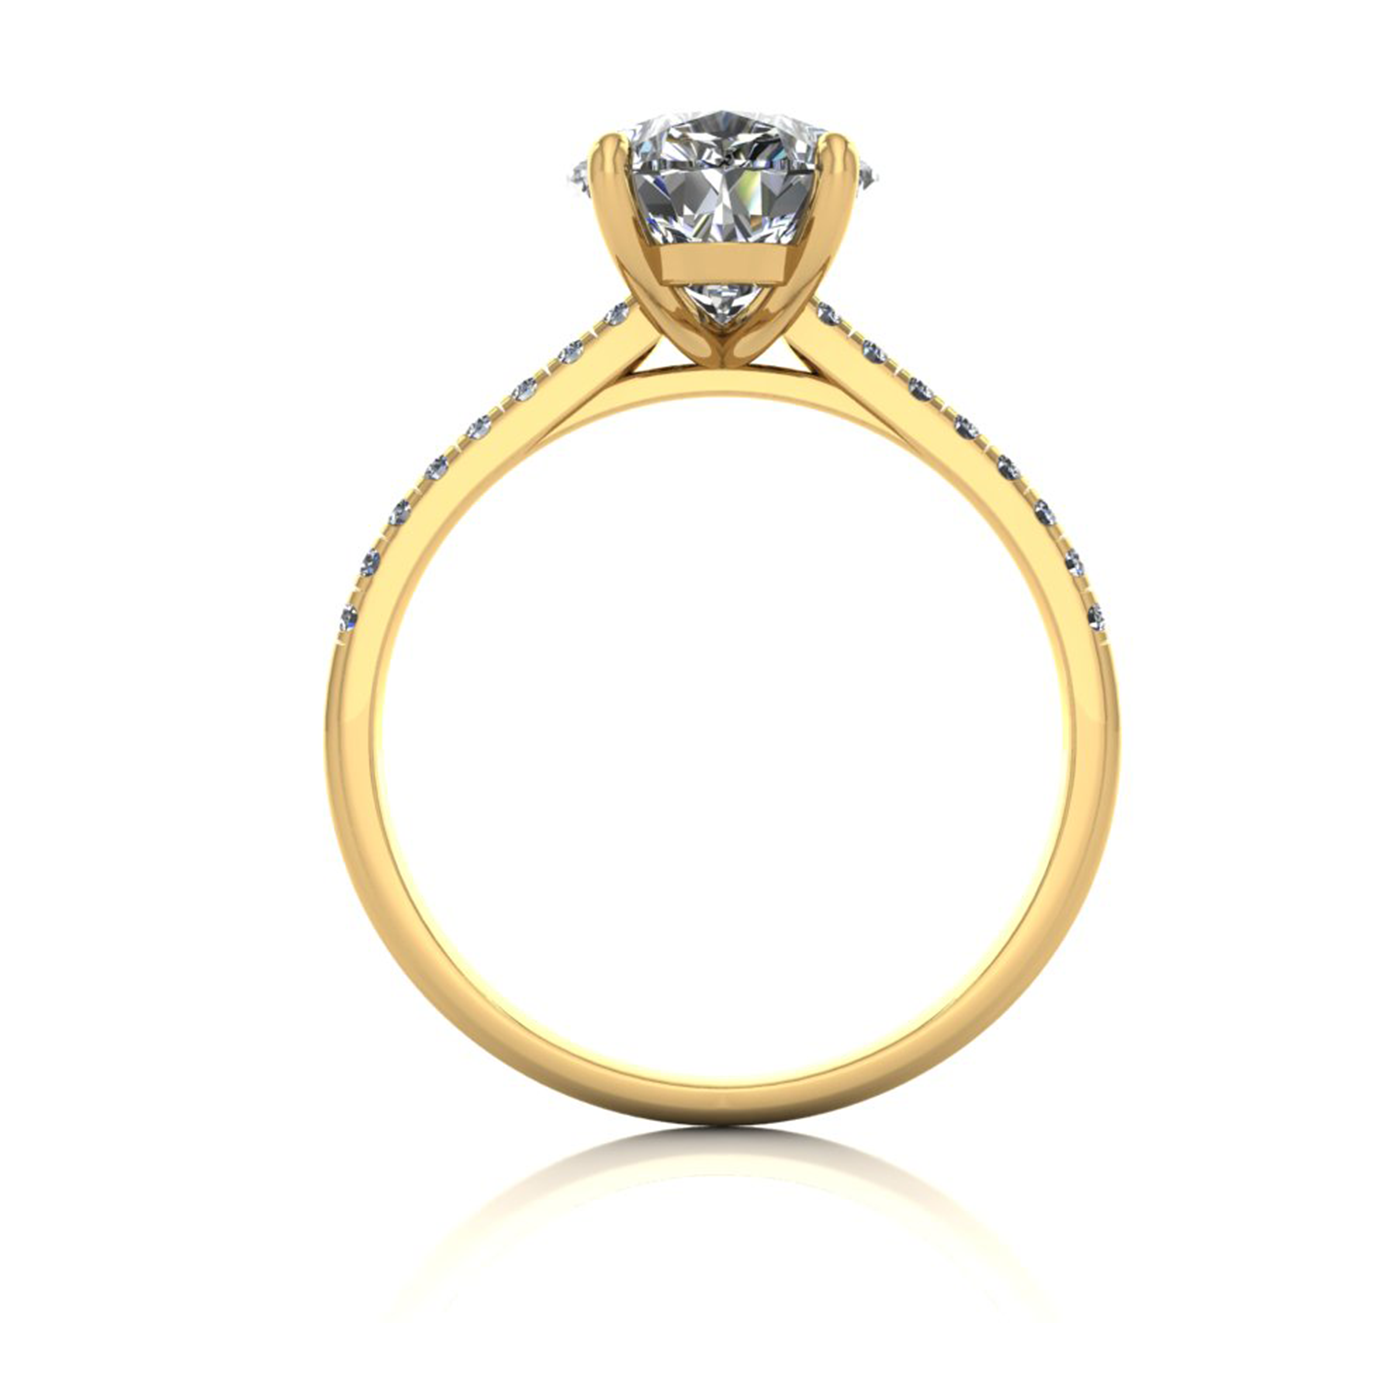 18k yellow gold 2,50 ct 3 prongs pear diamond engagement ring with whisper thin pavÉ set band